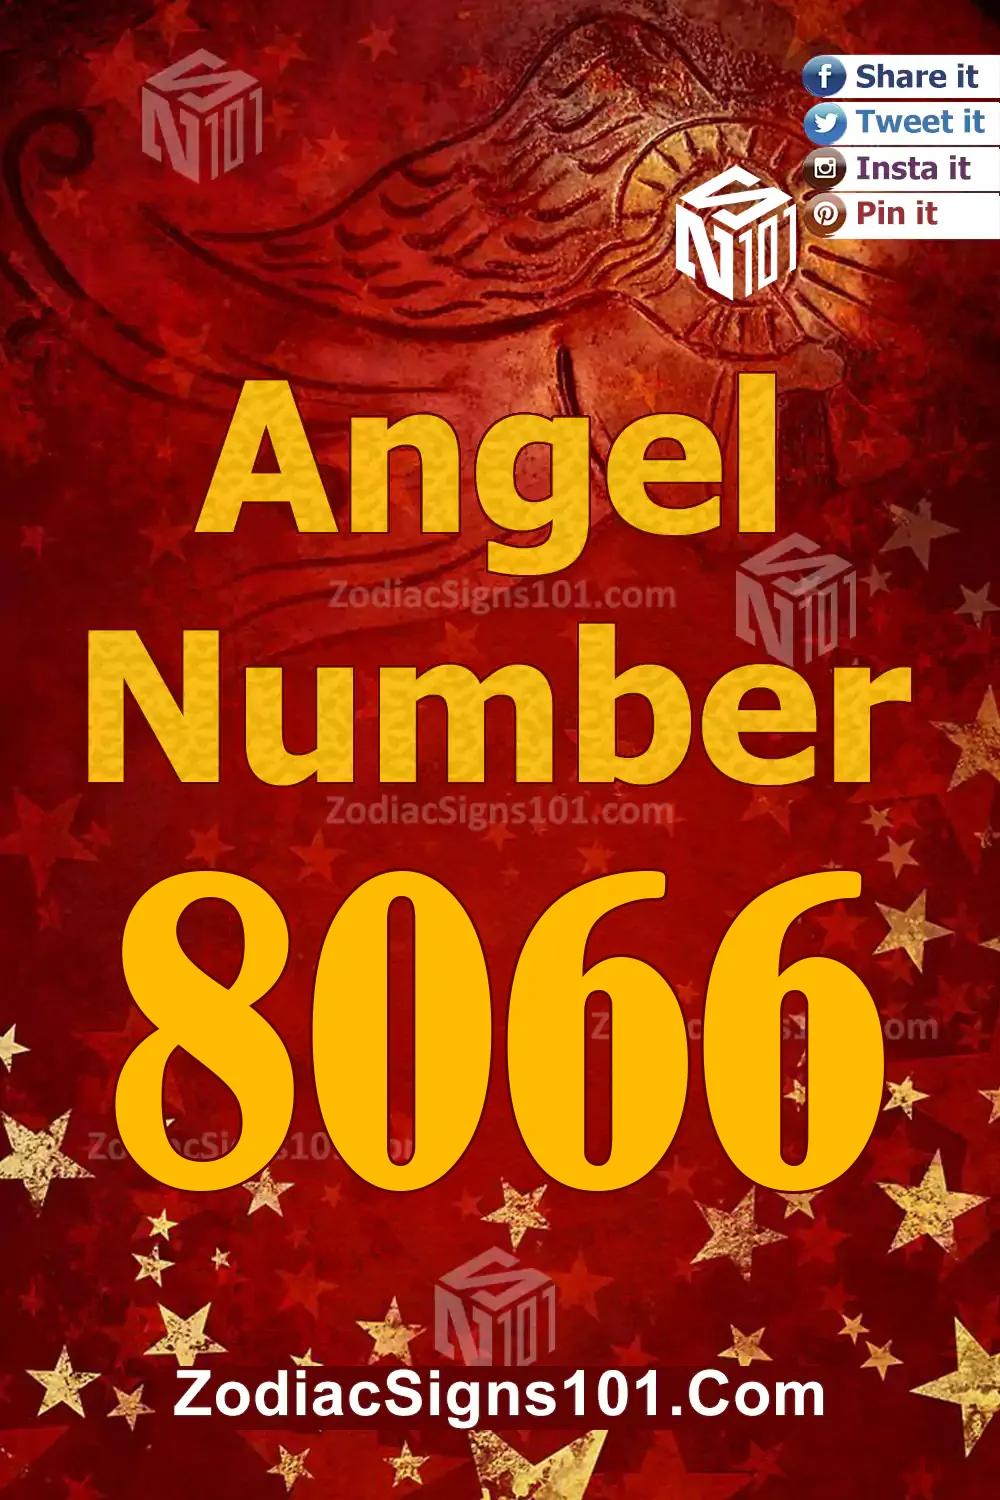 8066 Angel Number Meaning